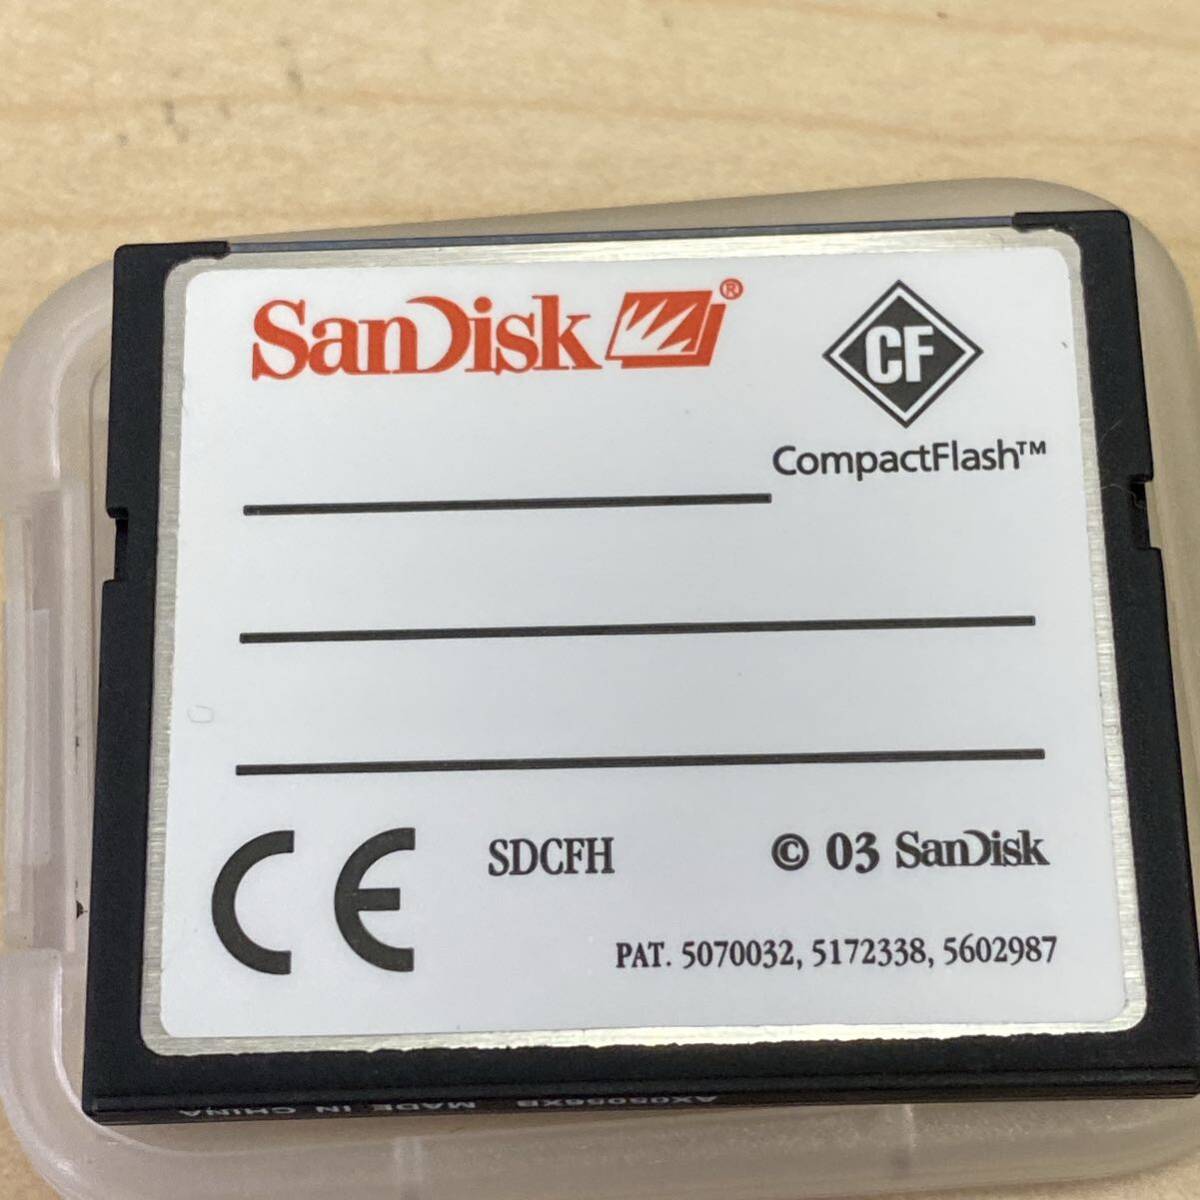 【TS0427】 SanDisk サンディスク コンパクトフラッシュ ultra Ⅱ 512MB Extreme Ⅲ 2.0GB CFカード ケース付き_画像3